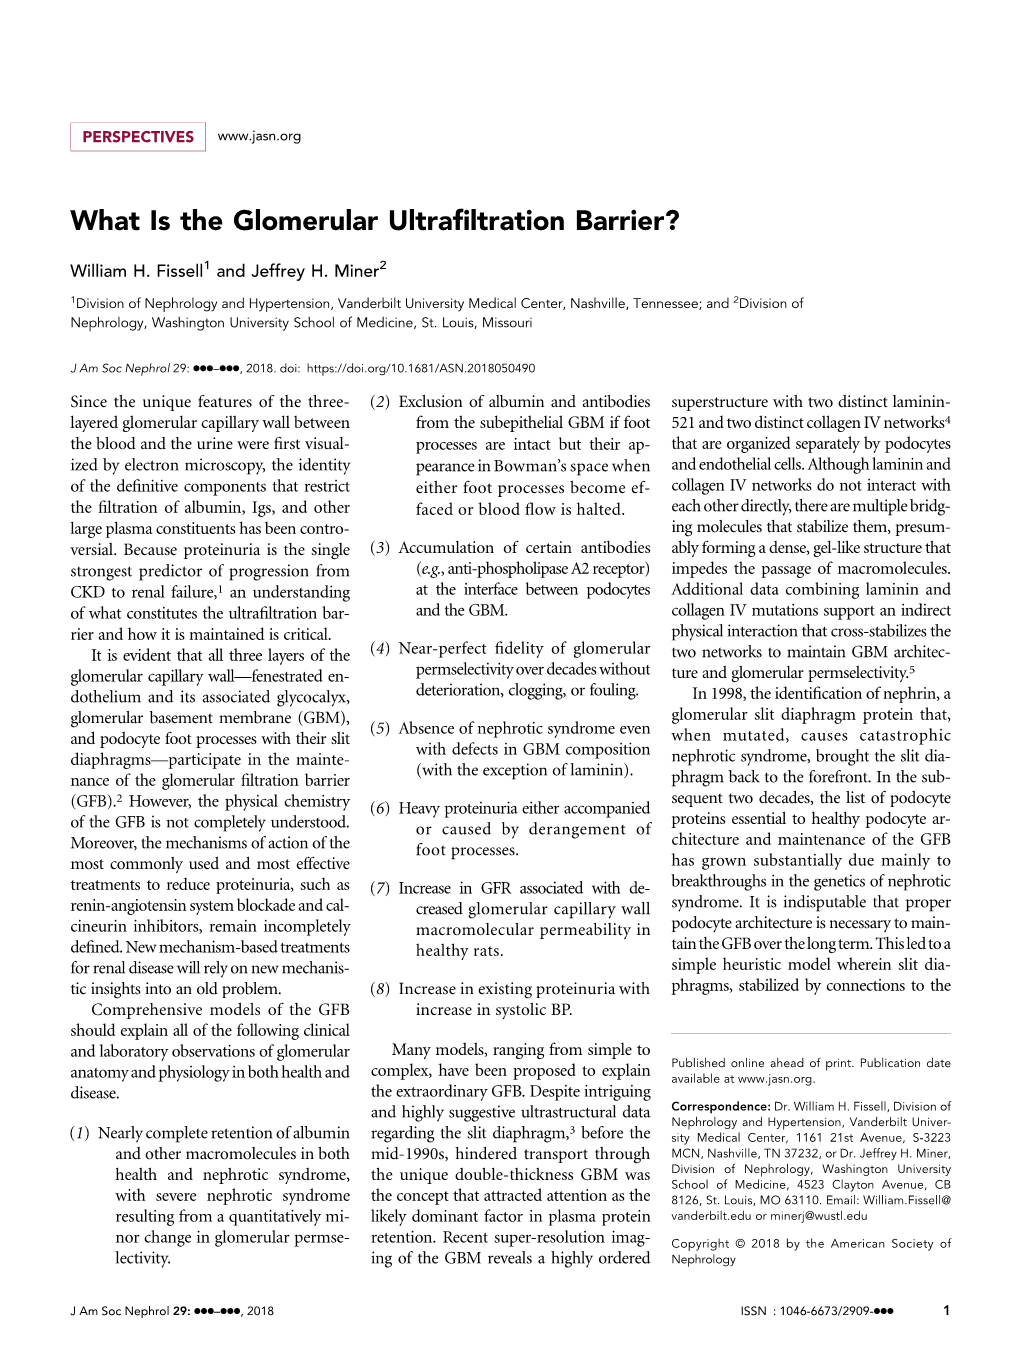 What Is the Glomerular Ultrafiltration Barrier?